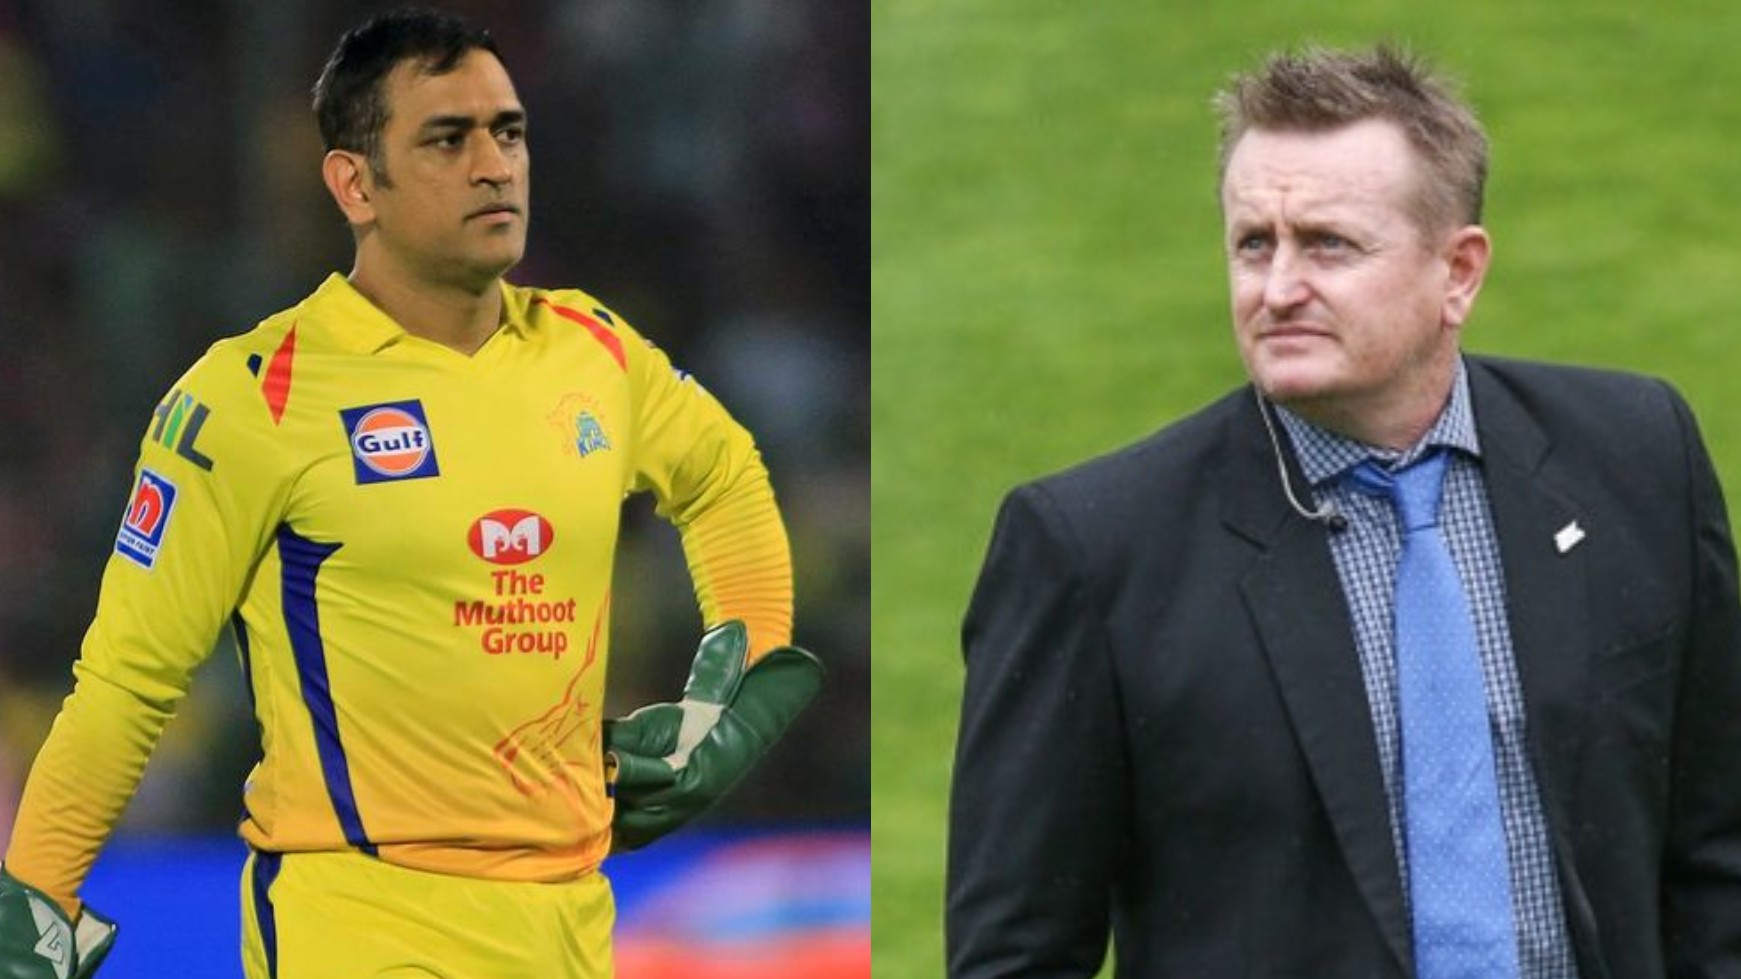 IPL 2021: “I think CSK are in big trouble, MS Dhoni has mentioned that,” says Scott Styris